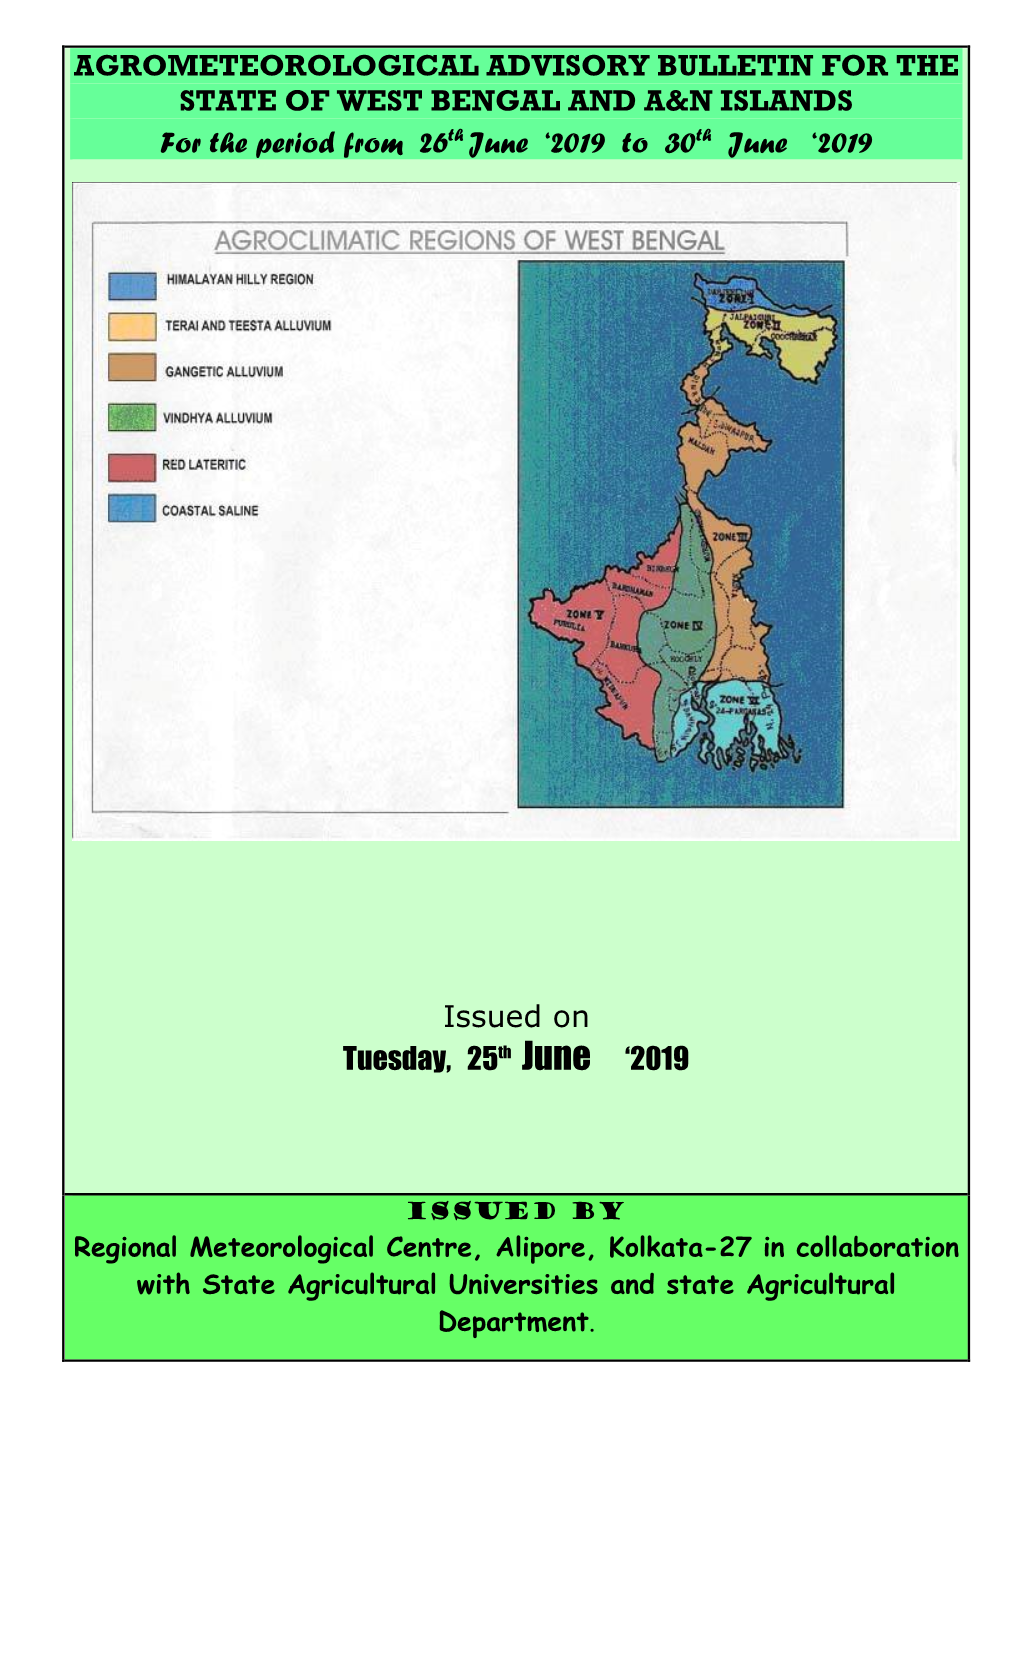 AGROMETEOROLOGICAL ADVISORY BULLETIN for the STATE of WEST BENGAL and A&N ISLANDS for the Period from 26Th June ‘2019 to 30Th June ‘2019